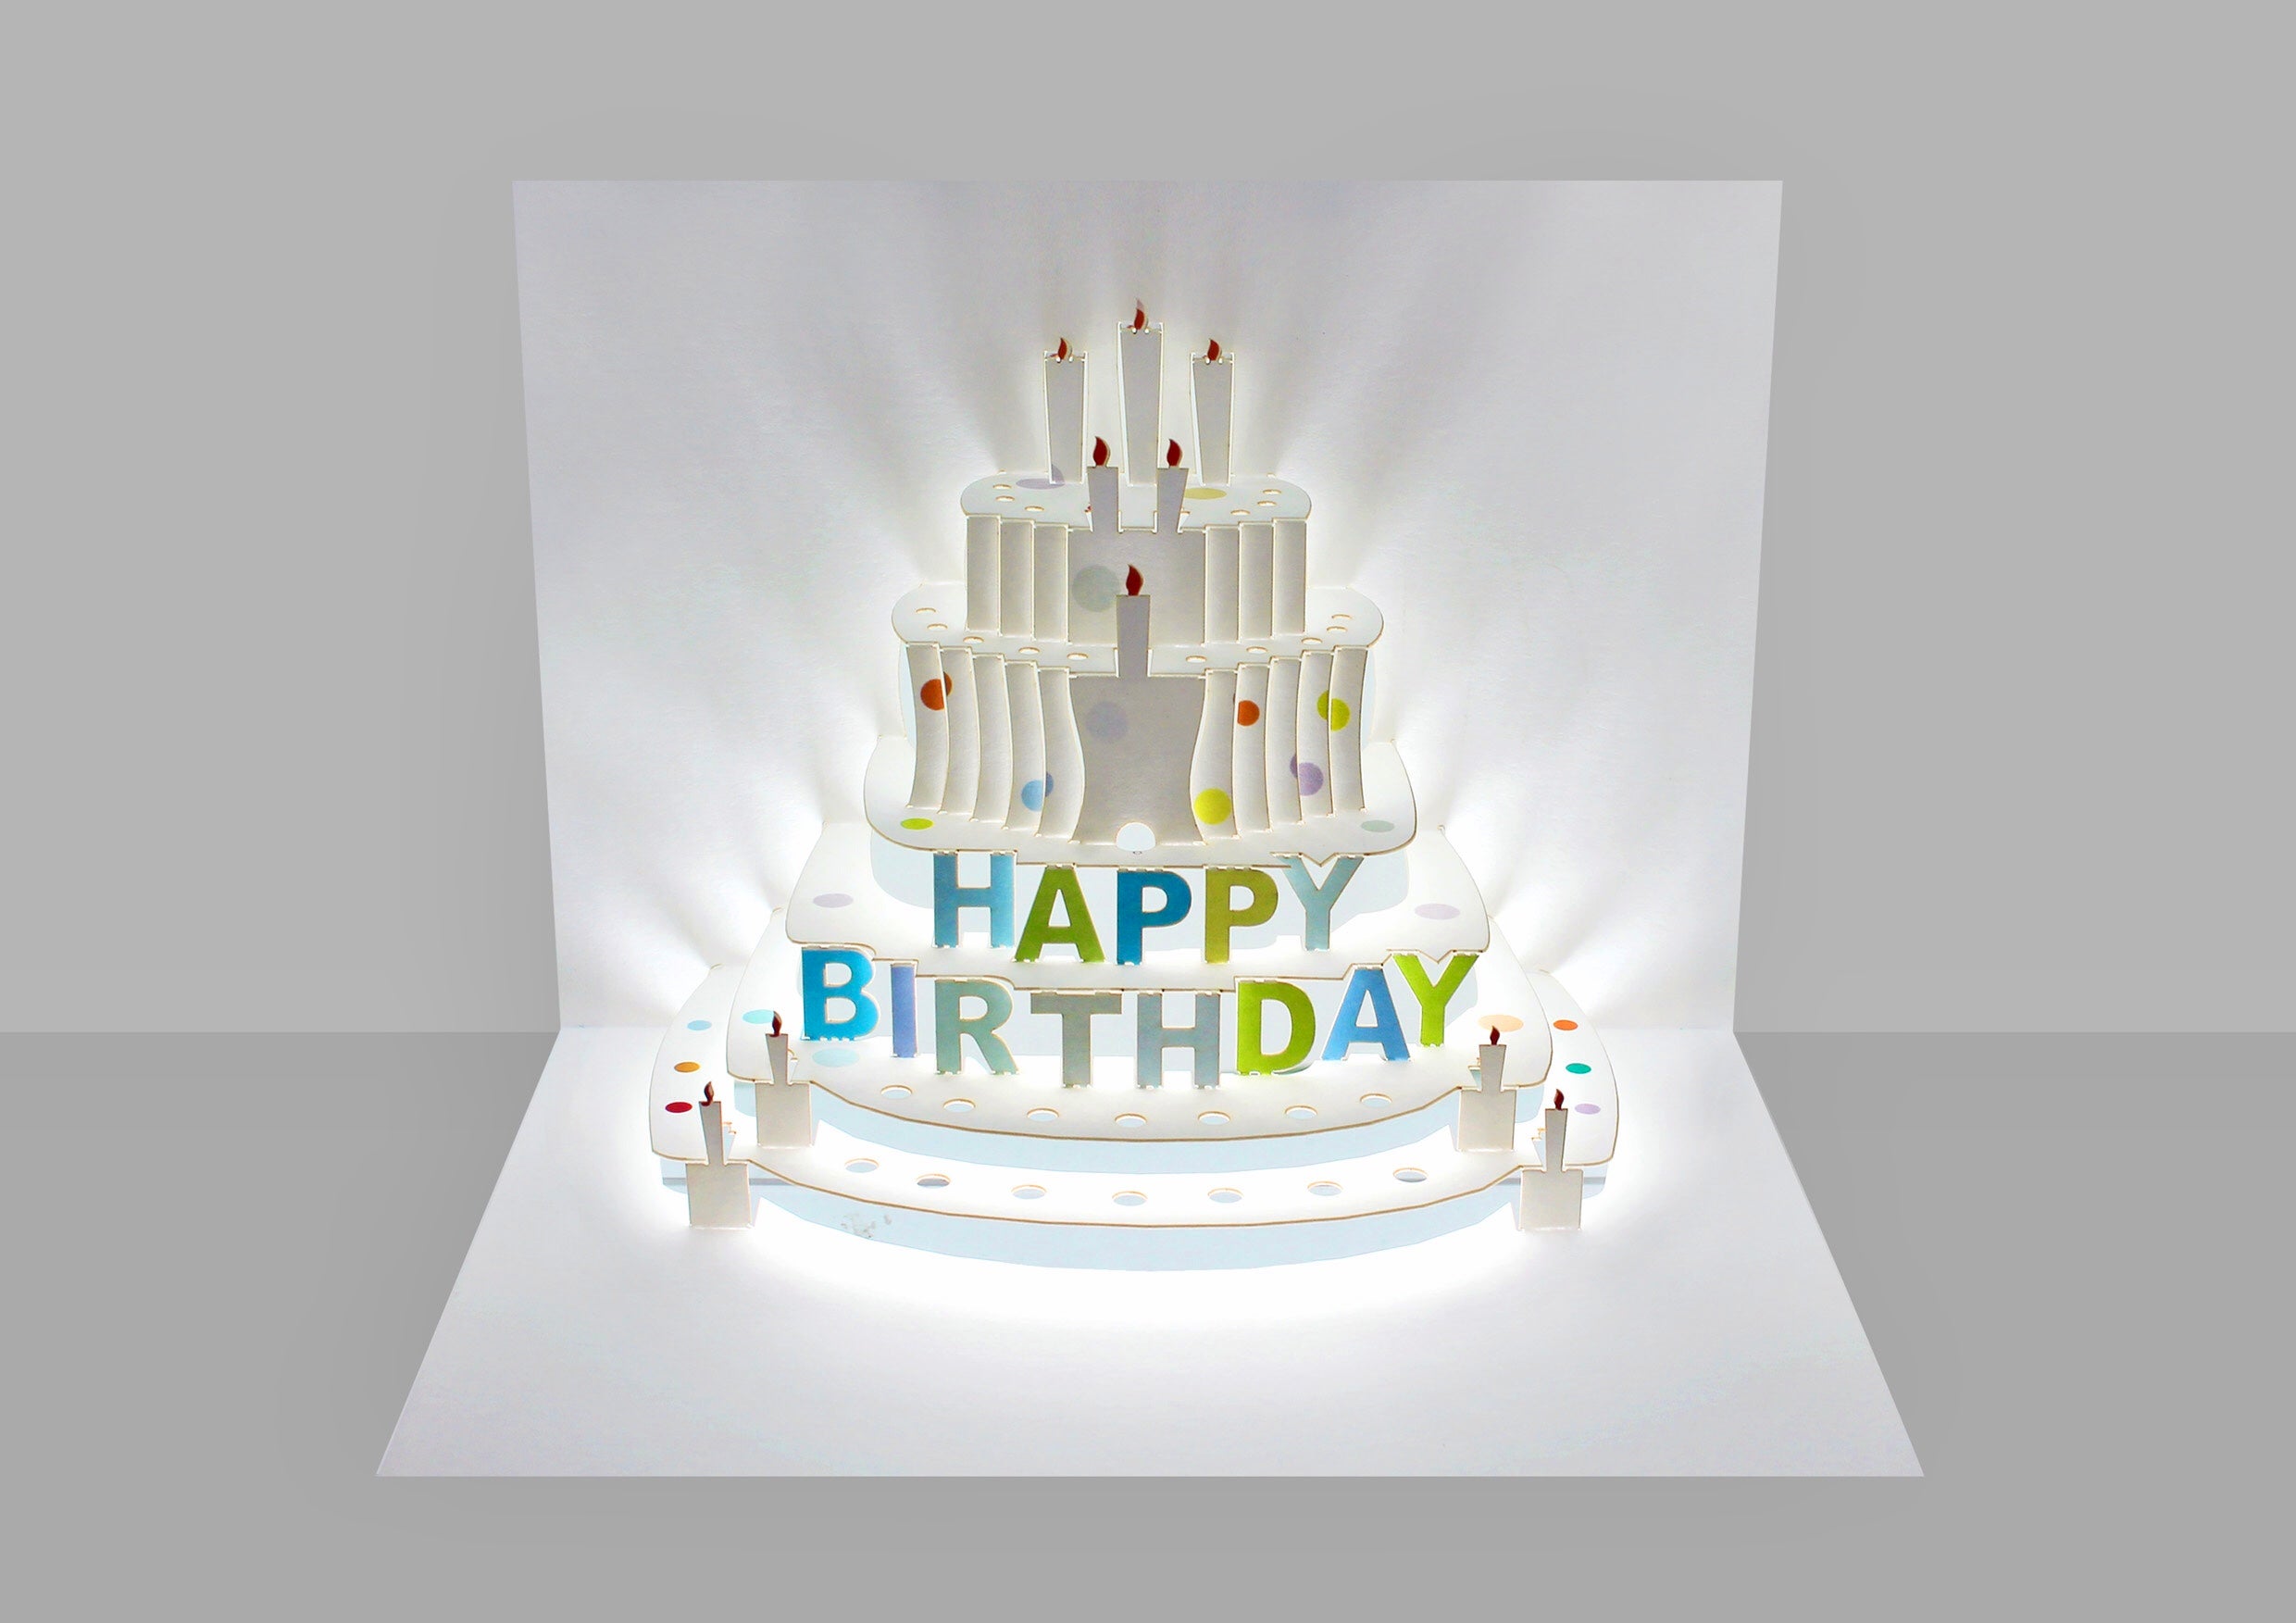 Free Stock Photo of Blank Birthday Cake | Download Free Images and Free  Illustrations